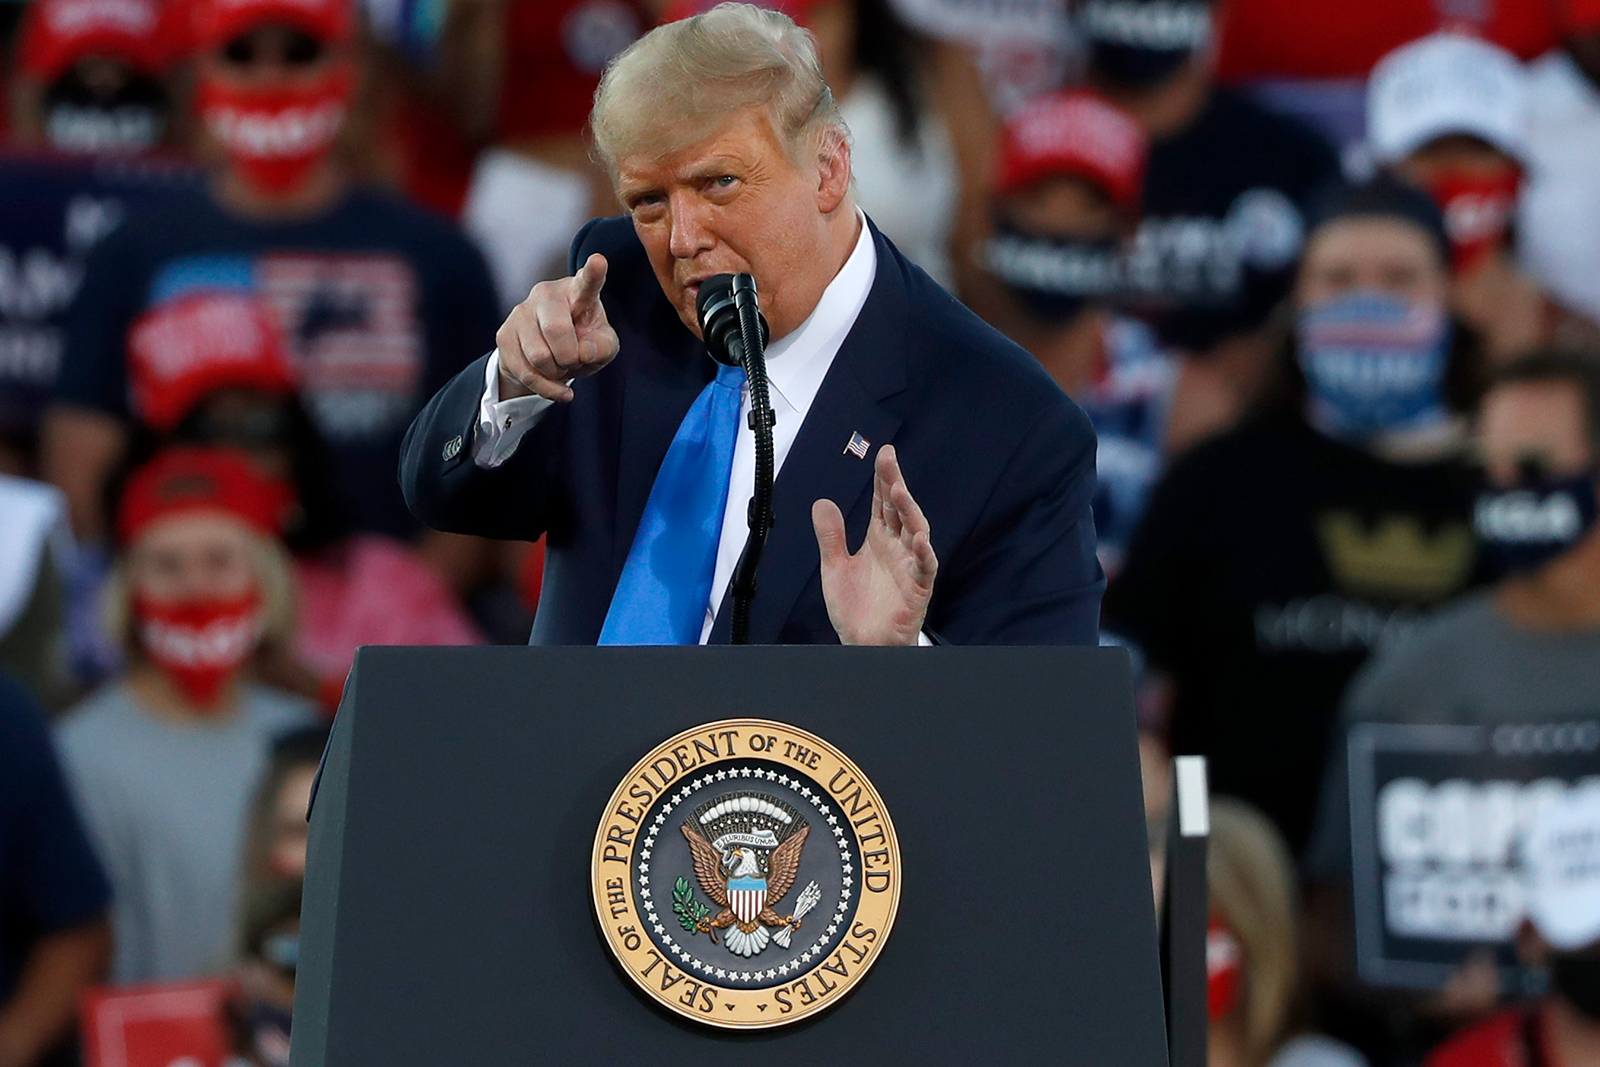 President Donald Trump gestures during a campaign rally in Carson City, Nevada, on October 18.